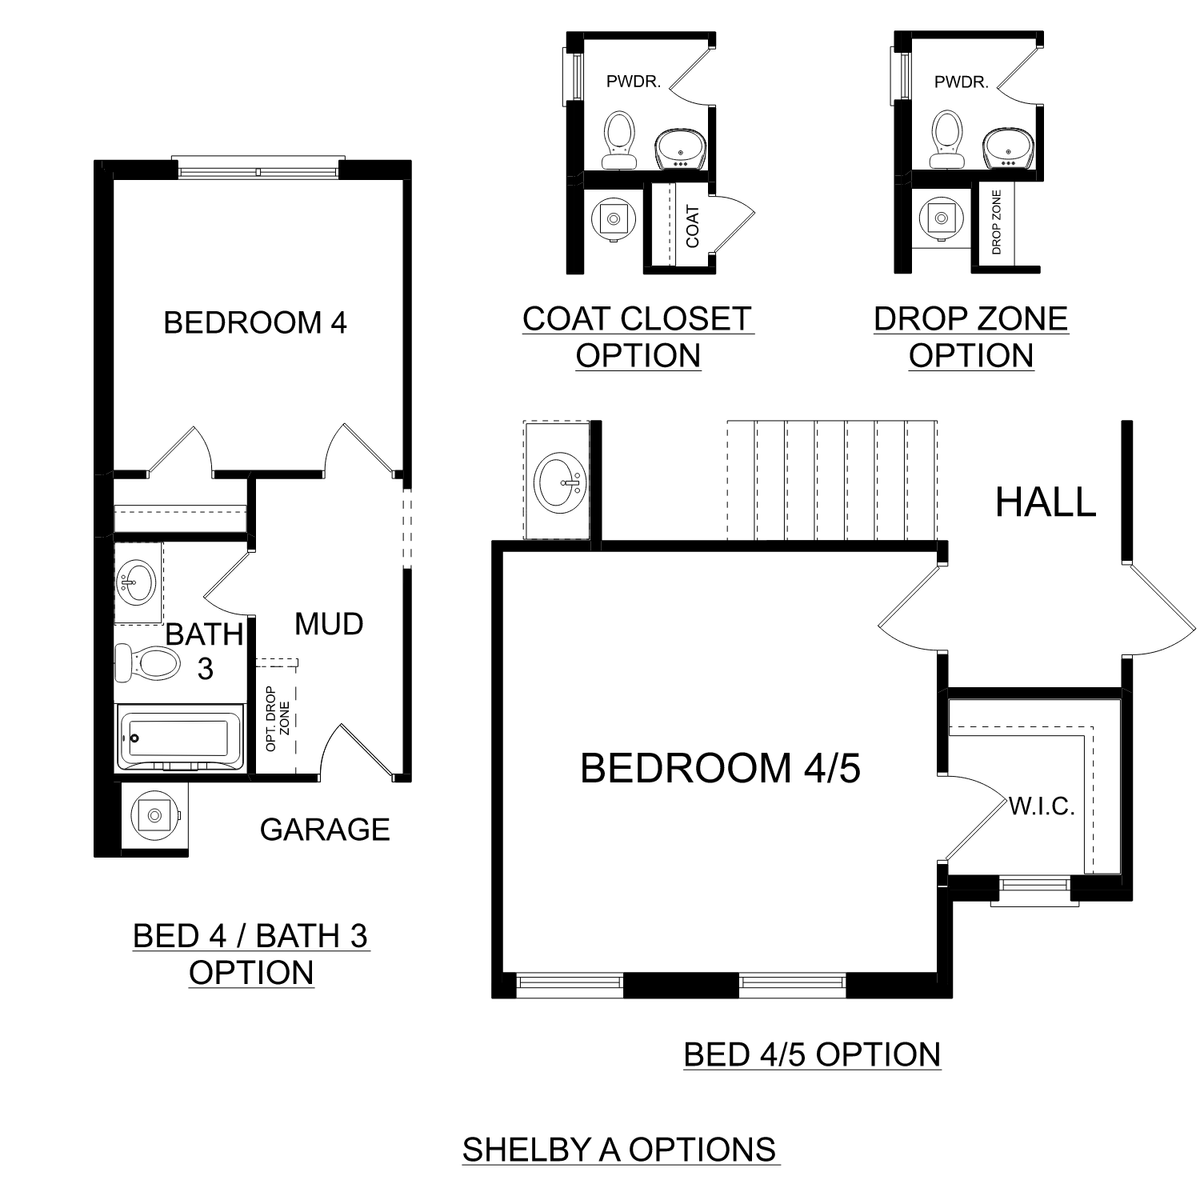 3 - The Shelby A buildable floor plan layout in Davidson Homes' Wood Trail community.